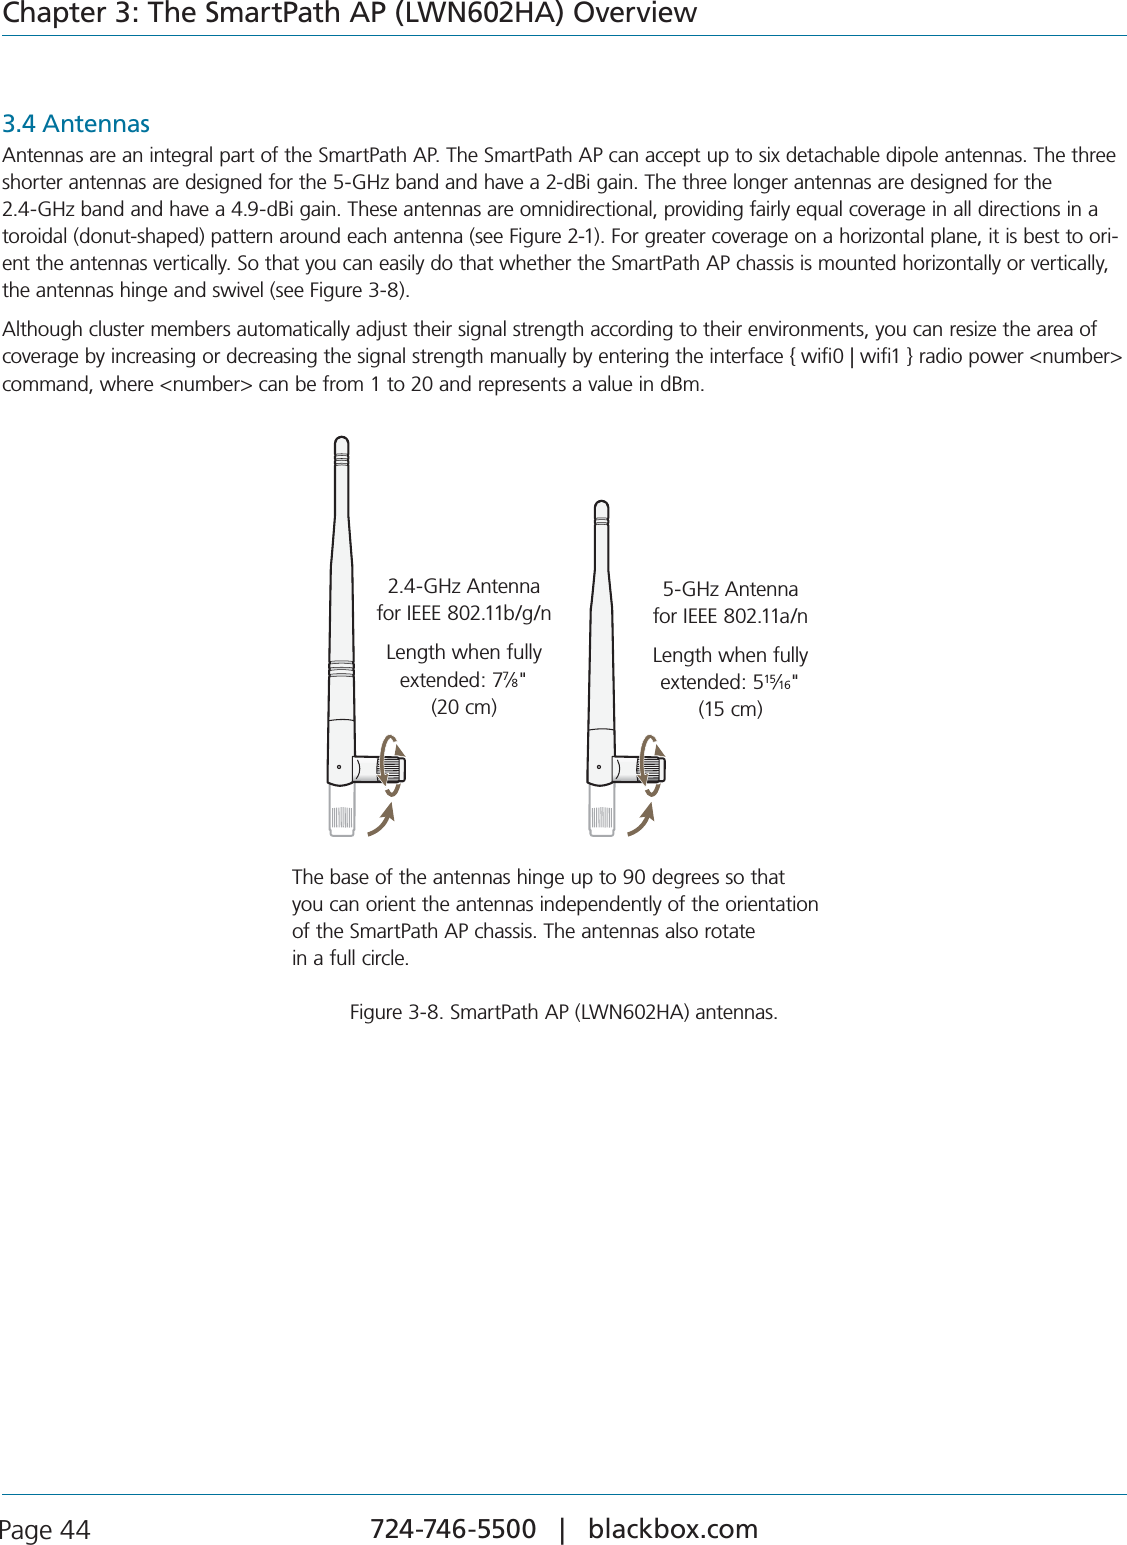 724-746-5500   |   blackbox.com Page 44Chapter 3: The SmartPath AP (LWN602HA) Overview3.4 AntennasAntennas are an integral part of the SmartPath AP. The SmartPath AP can accept up to six detachable dipole antennas. The three shorter antennas are designed for the 5-GHz band and have a 2-dBi gain. The three longer antennas are designed for the  2.4-GHz band and have a 4.9-dBi gain. These antennas are omnidirectional, providing fairly equal coverage in all directions in a toroidal (donut-shaped) pattern around each antenna (see Figure 2-1). For greater coverage on a horizontal plane, it is best to ori-ent the antennas vertically. So that you can easily do that whether the SmartPath AP chassis is mounted horizontally or vertically, the antennas hinge and swivel (see Figure 3-8).Although cluster members automatically adjust their signal strength according to their environments, you can resize the area of COVERAGEBYINCREASINGORDECREASINGTHESIGNALSTRENGTHMANUALLYBYENTERINGTHEINTERFACE[WIFI\WIFI]RADIOPOWERNUMBERCOMMANDWHERENUMBERCANBEFROMTOANDREPRESENTSAVALUEIND&quot;M5 GHz Antenna for IEEE 802.11a/nLength when fully extended: 5 15/16” (15 cm)2.4 GHz Antenna for IEEE 802.11b/g/nLength when fully extended: 7 7/8” (20 cm)5-GHz Antenna  for IEEE 802.11a/nLength when fully extended: 515⁄16&quot;  (15 cm)2.4-GHz Antenna  for IEEE 802.11b/g/nLength when fully extended: 77⁄8&quot;  (20 cm)The base of the antennas hinge up to 90 degrees so that  you can orient the antennas independently of the orientation of the SmartPath AP chassis. The antennas also rotate  in a full circle.Figure 3-8. SmartPath AP (LWN602HA) antennas.